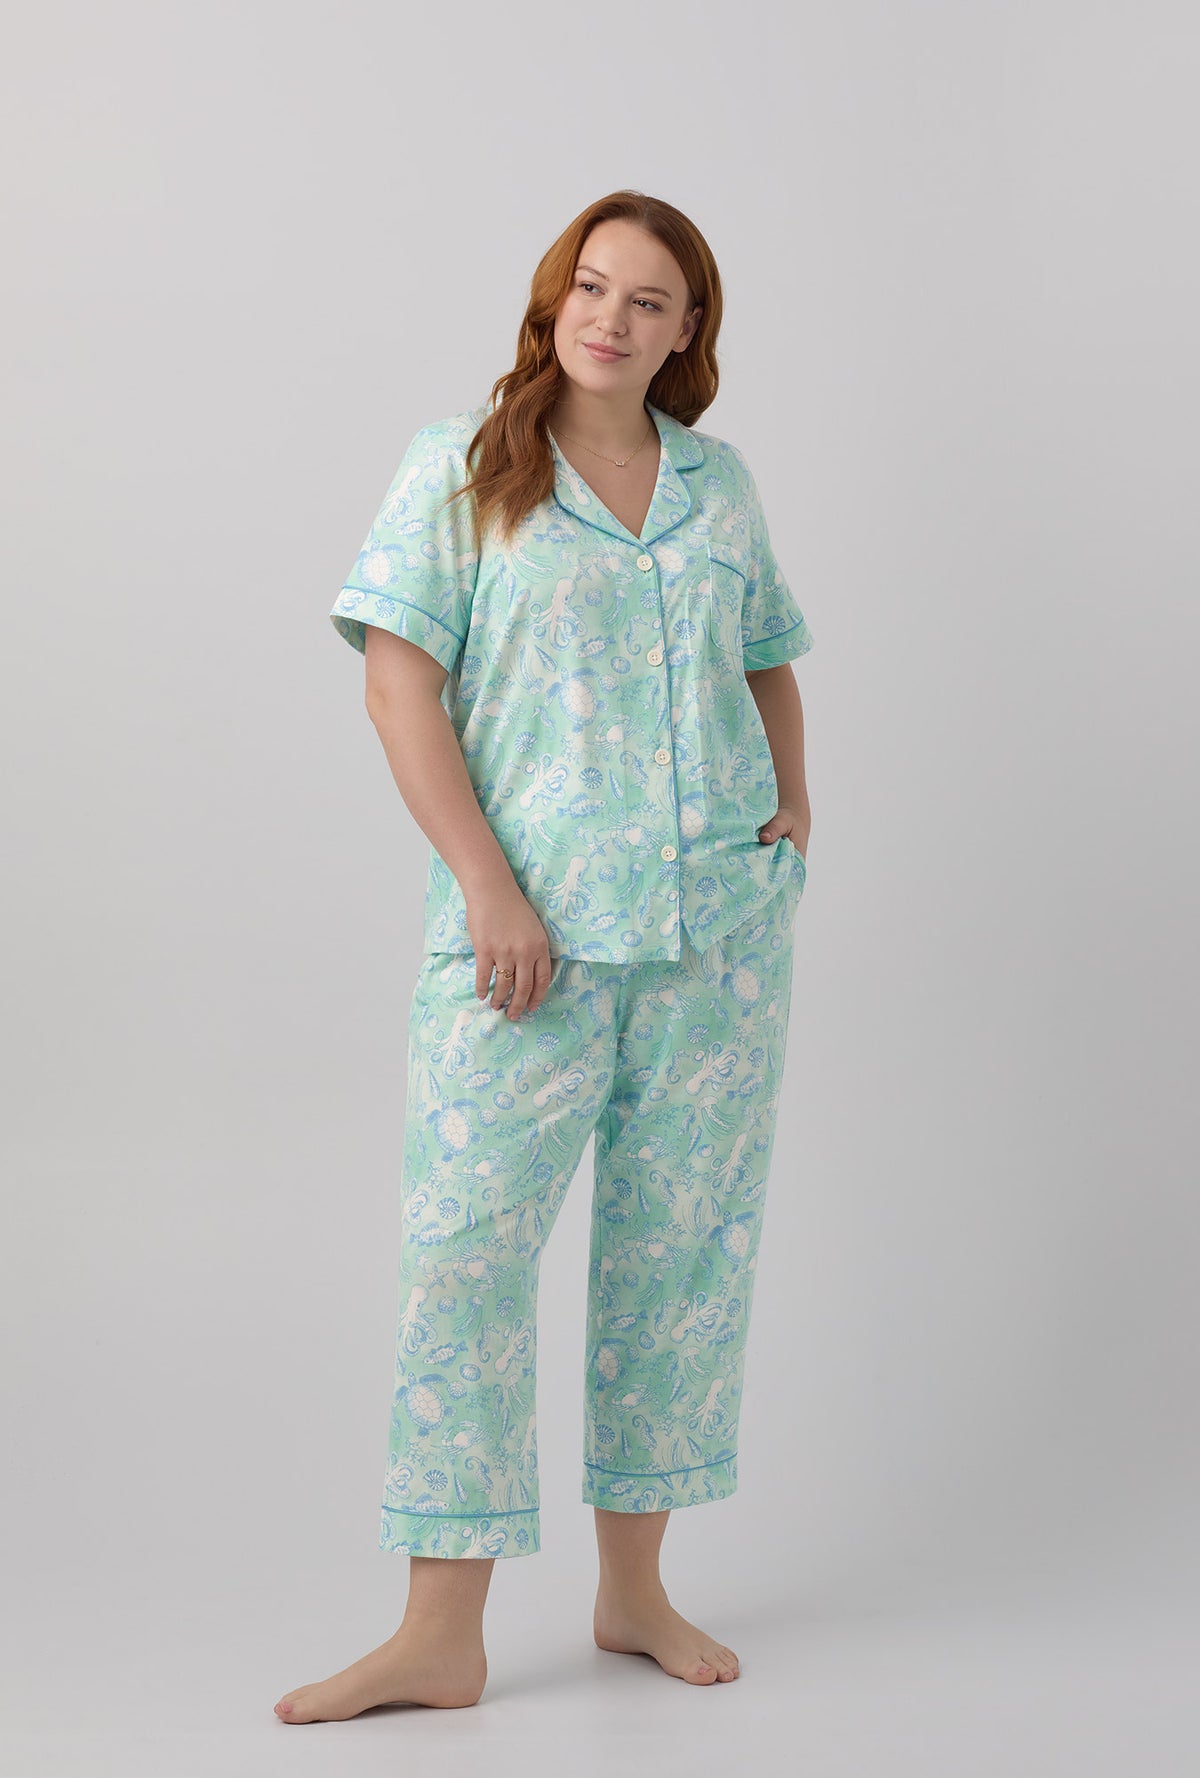 A lady wearing short sleeve stretch jersey cropped plus size pj set with aquatic life print